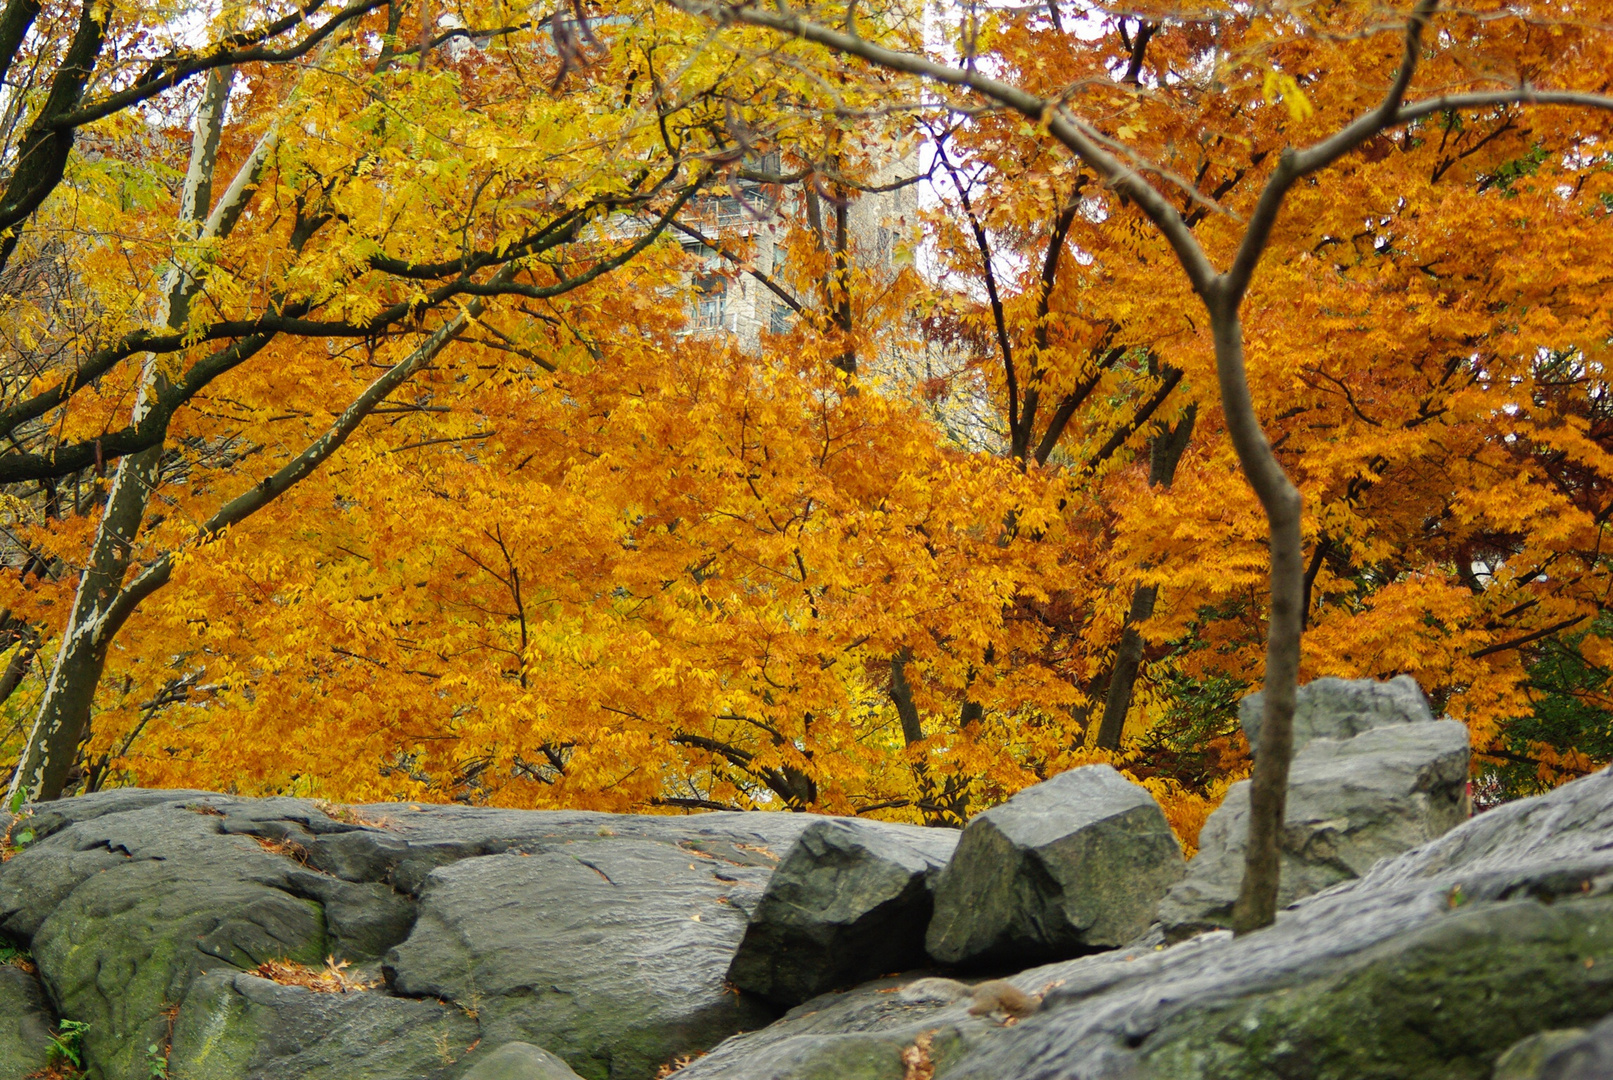 Herbst Stimmung- Fall in Central Park